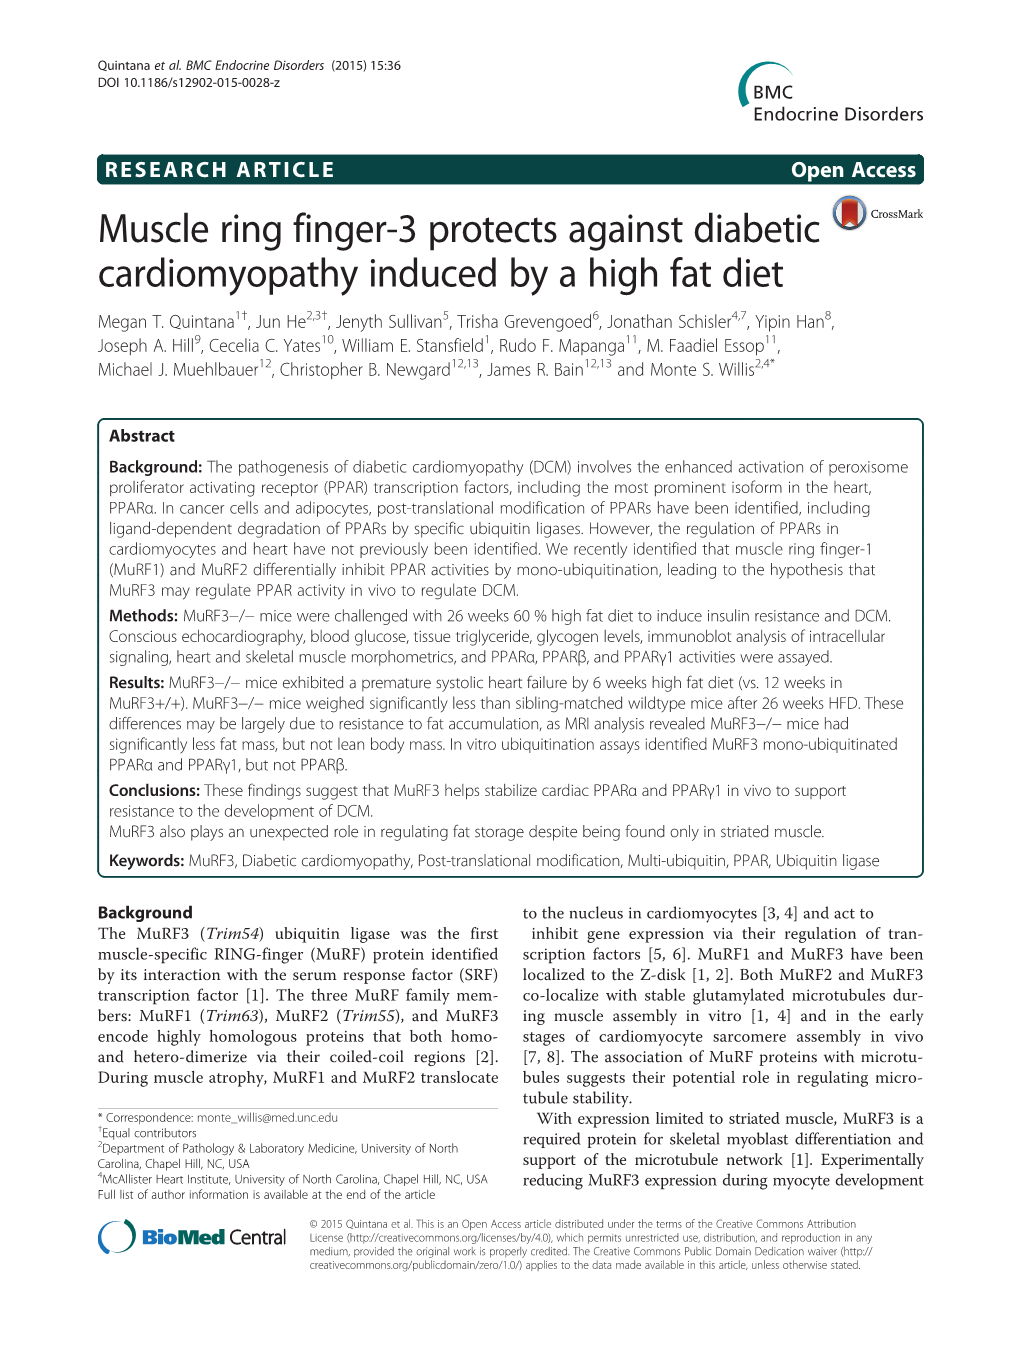 Muscle Ring Finger-3 Protects Against Diabetic Cardiomyopathy Induced by a High Fat Diet Megan T